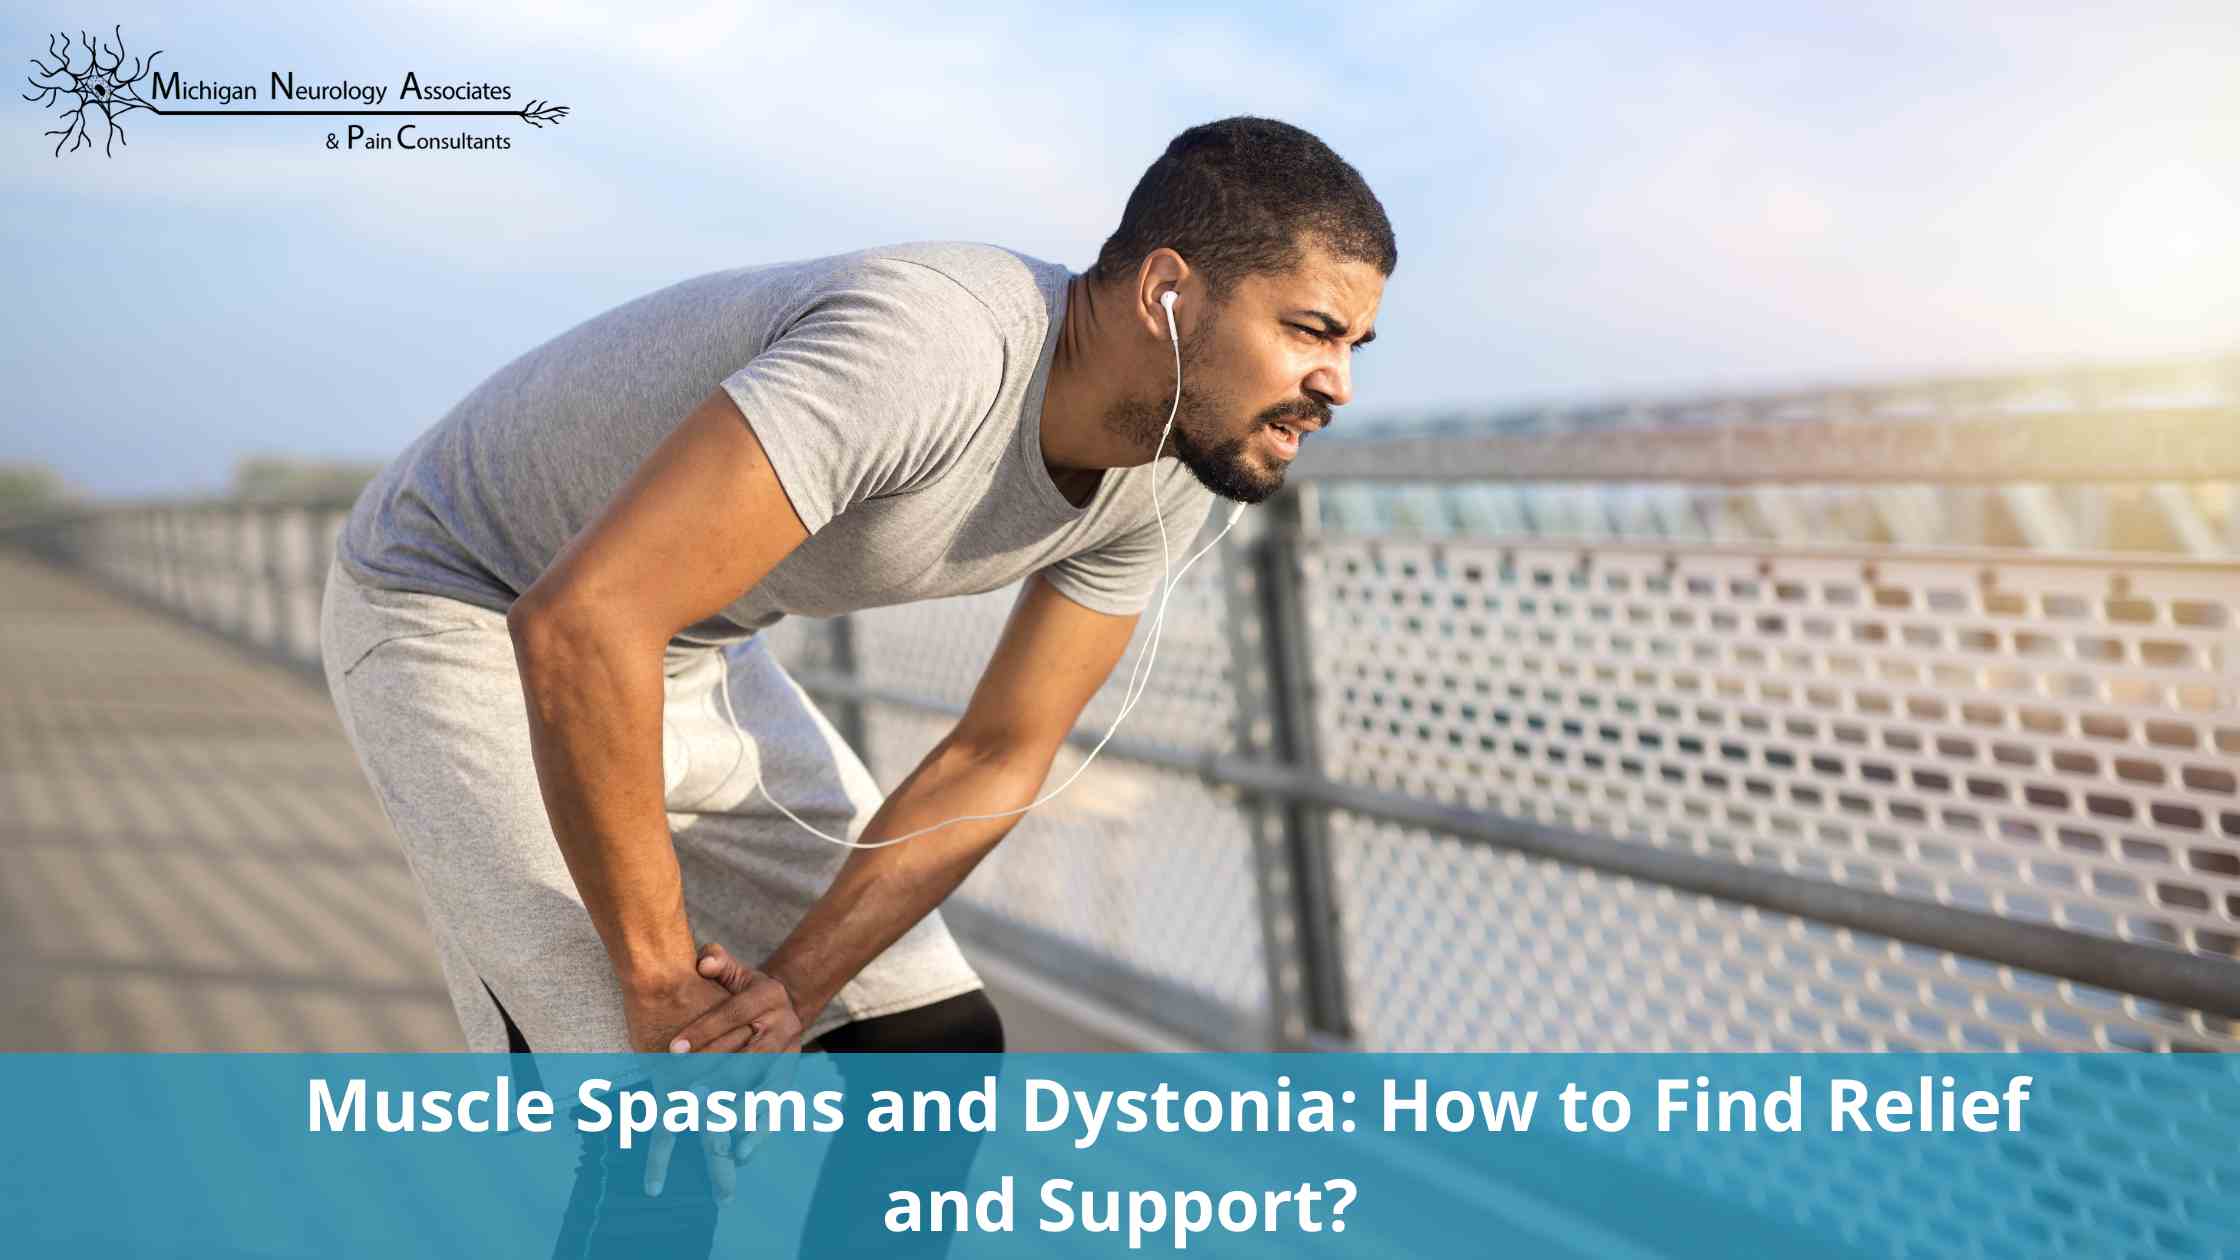 Muscle Spasms and Dystonia: How to Find Relief and Support?